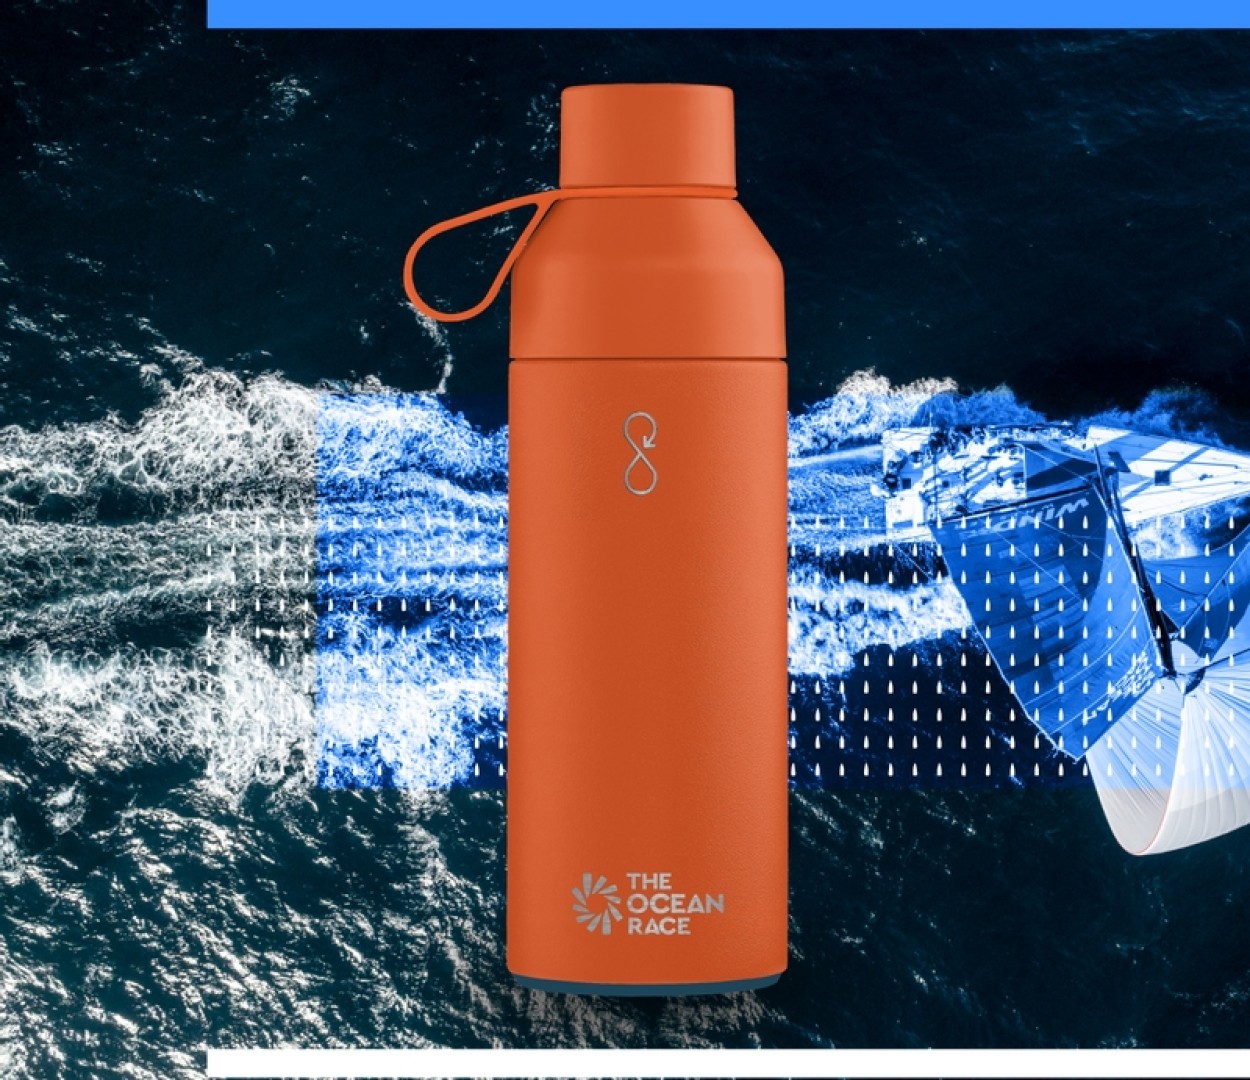 The special-edition bottle to commemorate The Ocean Race 2022-23
© The Ocean Race